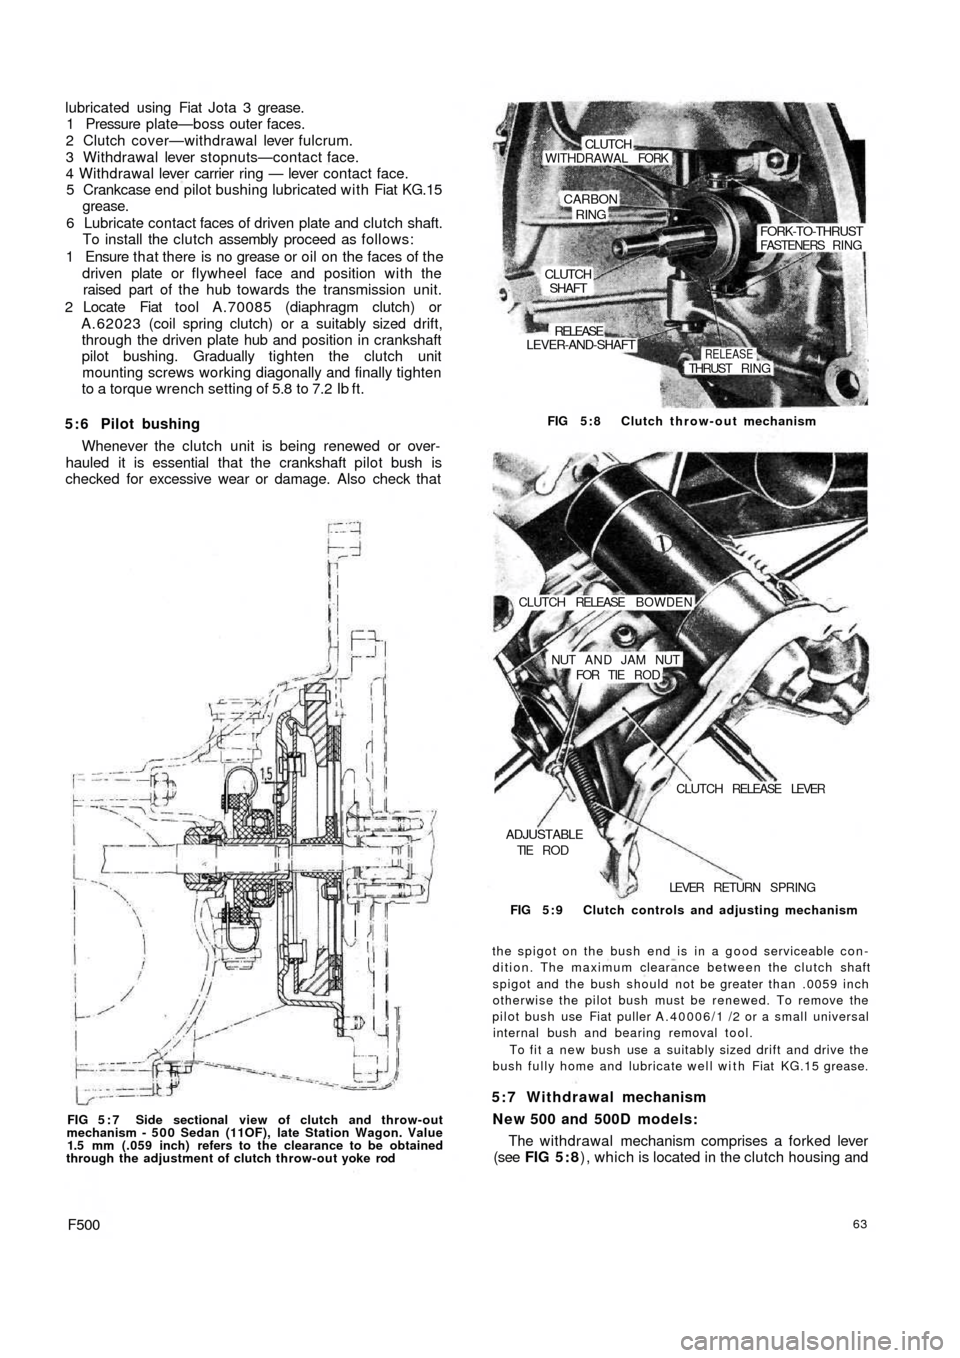 FIAT 500 1957 1.G Workshop Manual lubricated using Fiat Jota 3 grease.
1 Pressure plate—boss outer faces.
2 Clutch cover—withdrawal lever fulcrum.
3 Withdrawal lever stopnuts—contact face.
4 Withdrawal lever carrier ring — lev